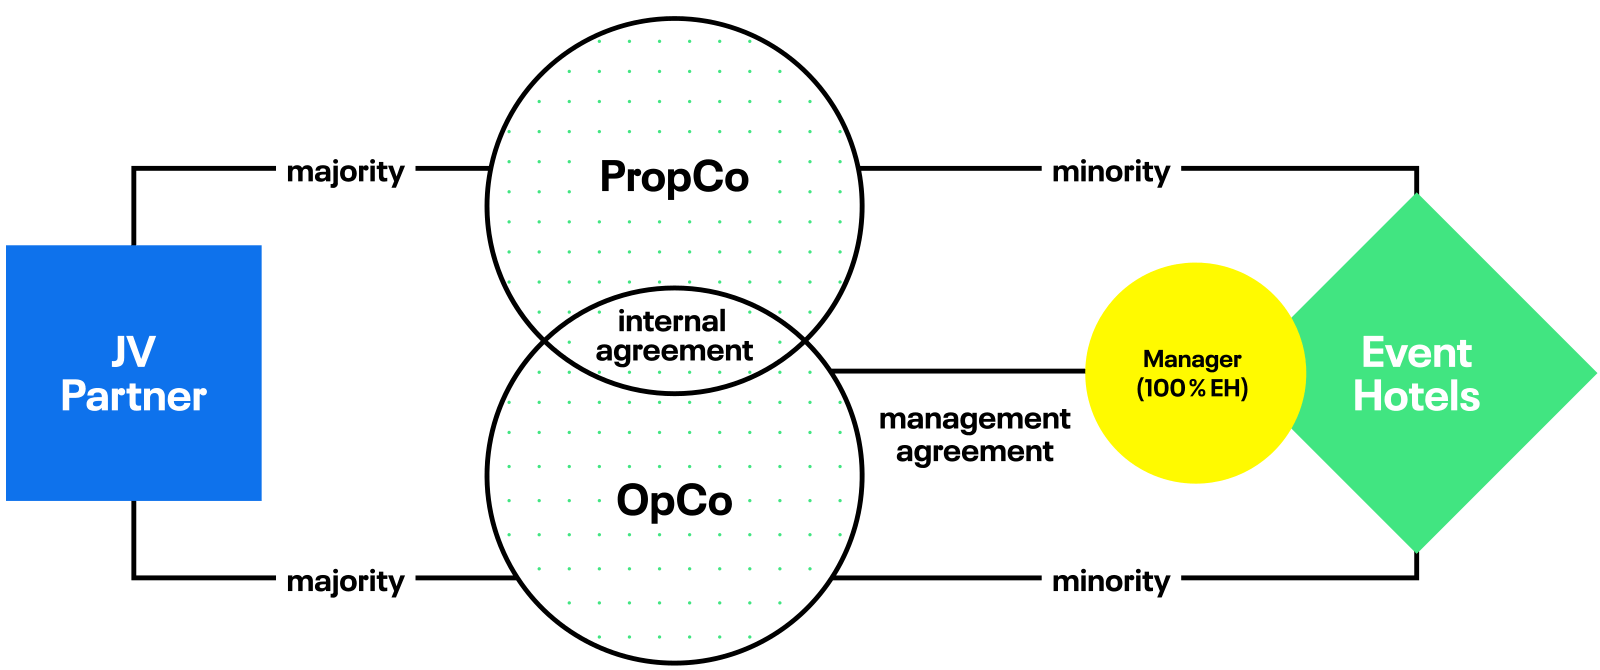 Event Hotels Operations Structure